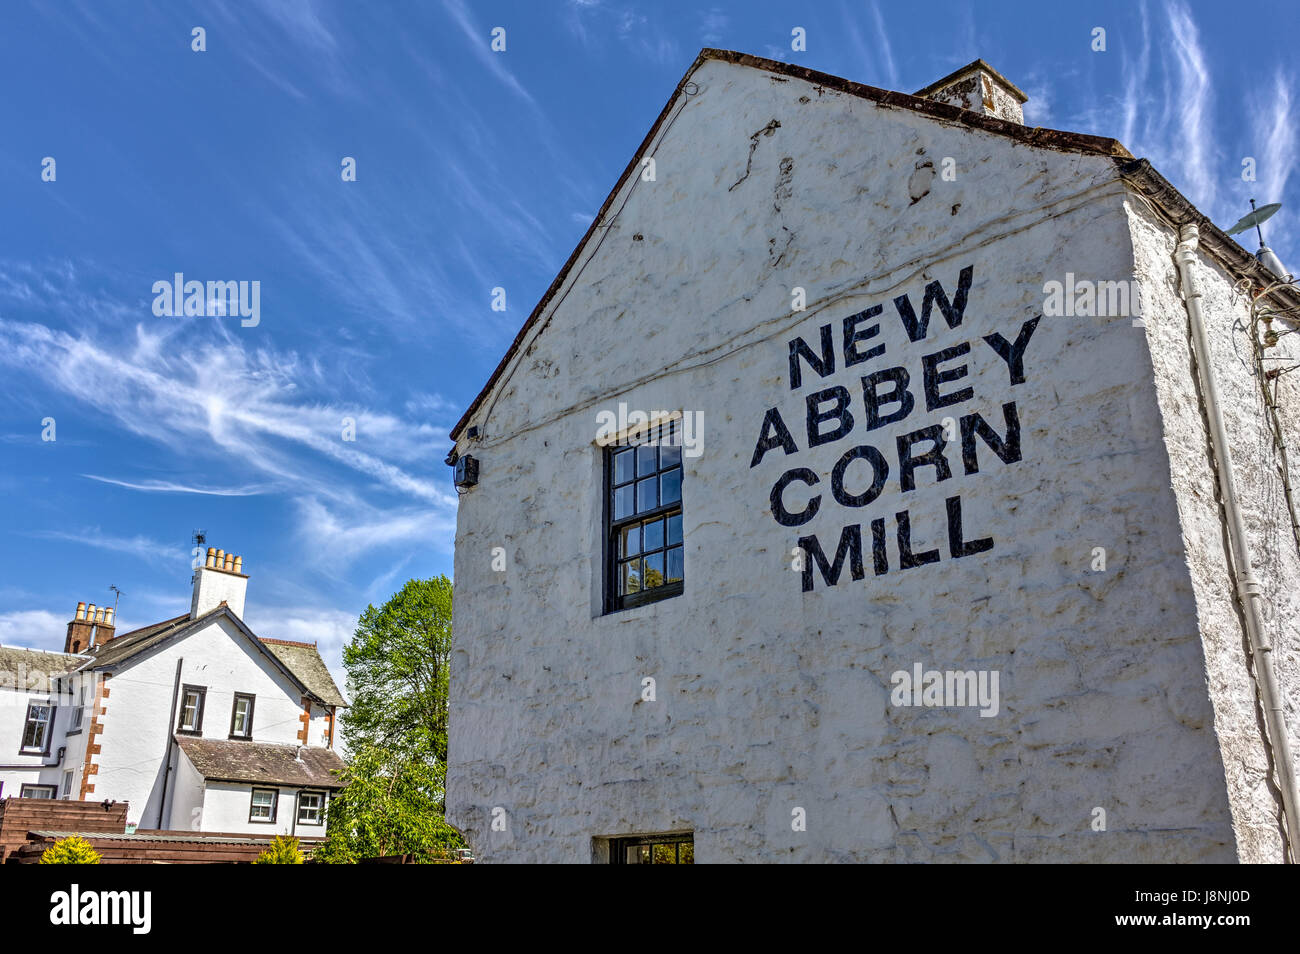 18th century Corn Mill, owned by Historic Environment Scotland and open to the public in New Abbey, Dumfries and Galloway, Scotland. HDR image. Stock Photo